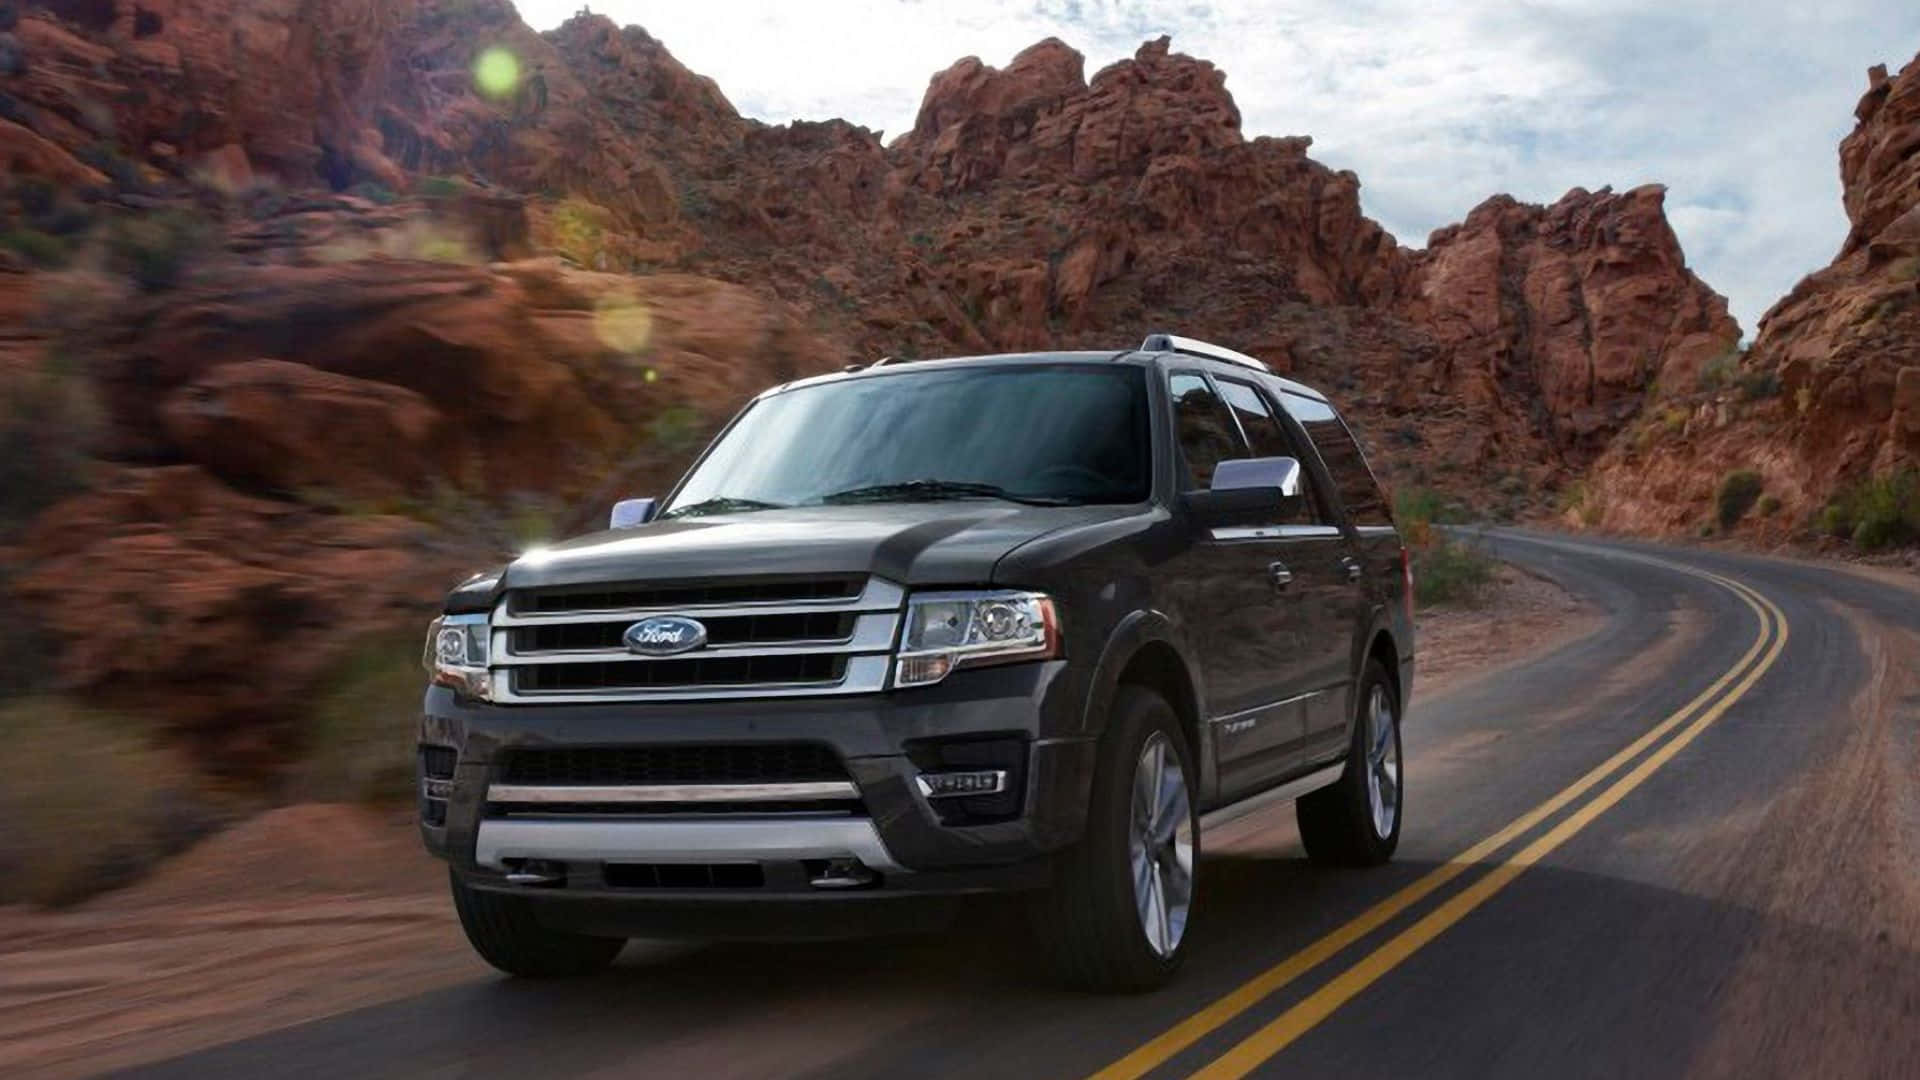 Sleek and Powerful Ford Expedition SUV Wallpaper